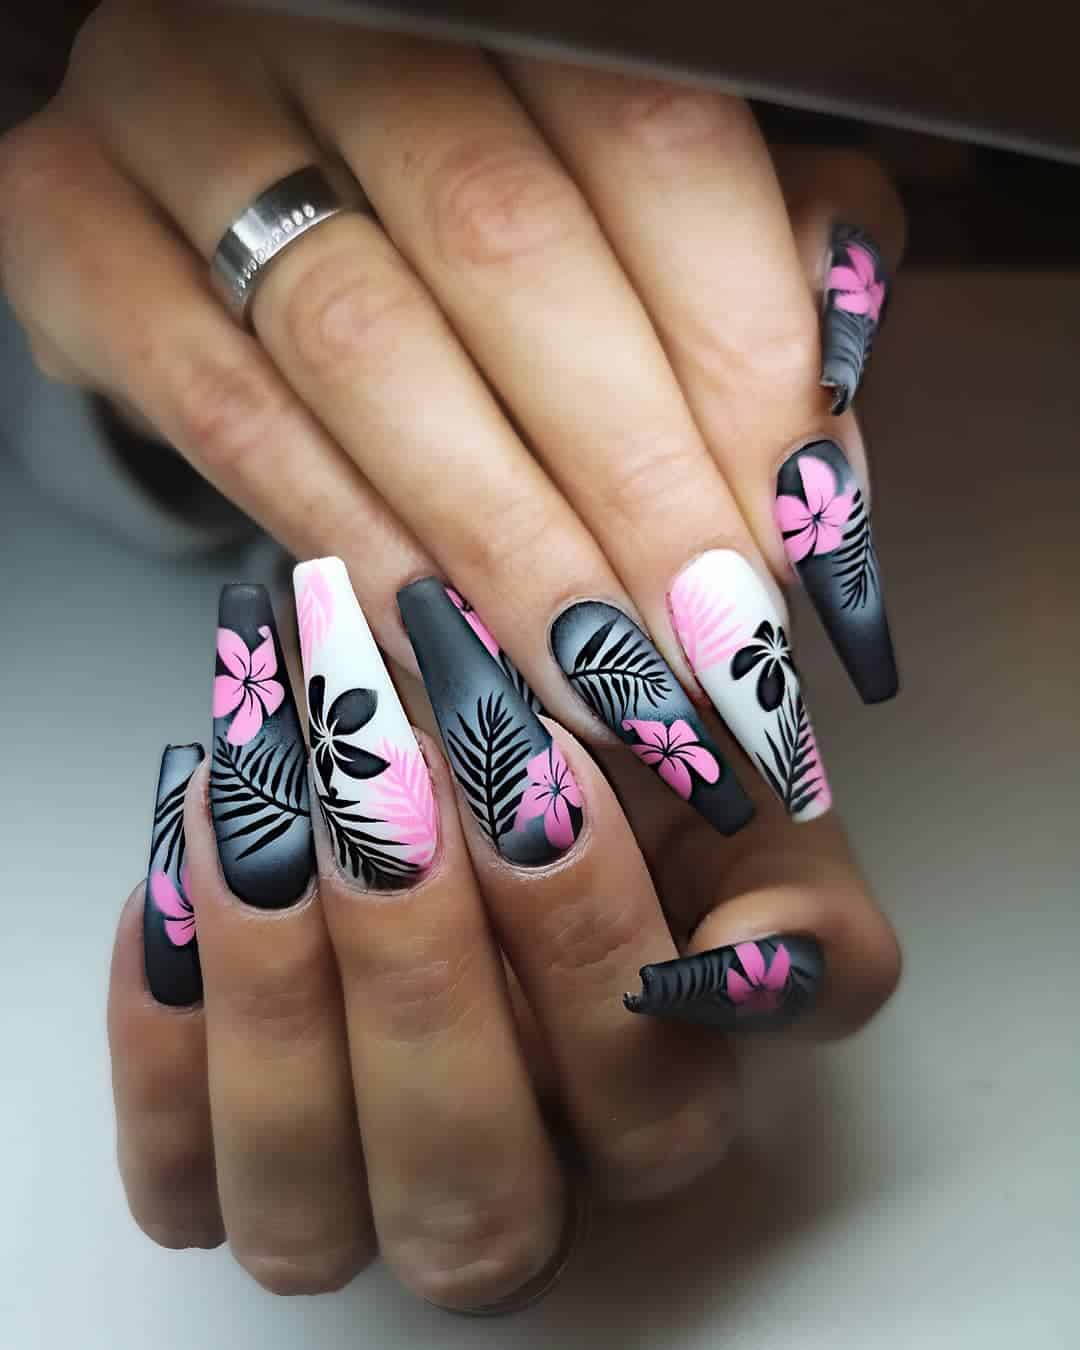 Coffin nails are a great trend in the nail art world and this post highlights 21 different coffin designs that you should try right now! This post features lots of different shapes and sizes, and will provide you with inspiration for your next manicure. #coffinnails #coffinnailart #coffinnaildesigns #coffinacrylicnails